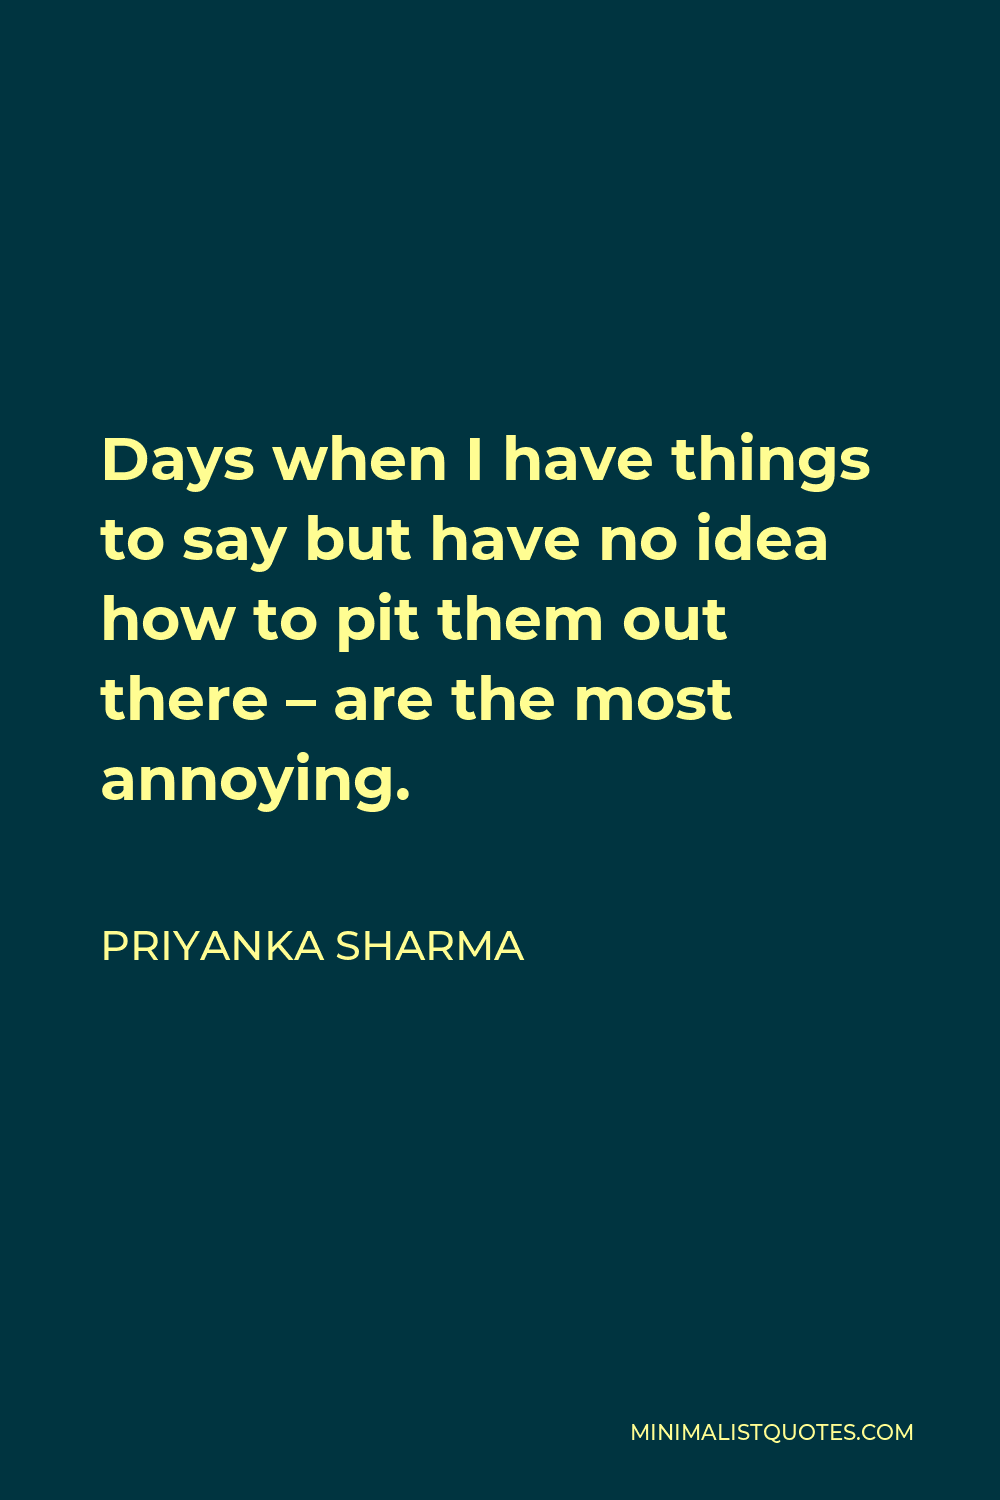 Priyanka Sharma Quote - Days when I have things to say but have no idea how to pit them out there – are the most annoying.